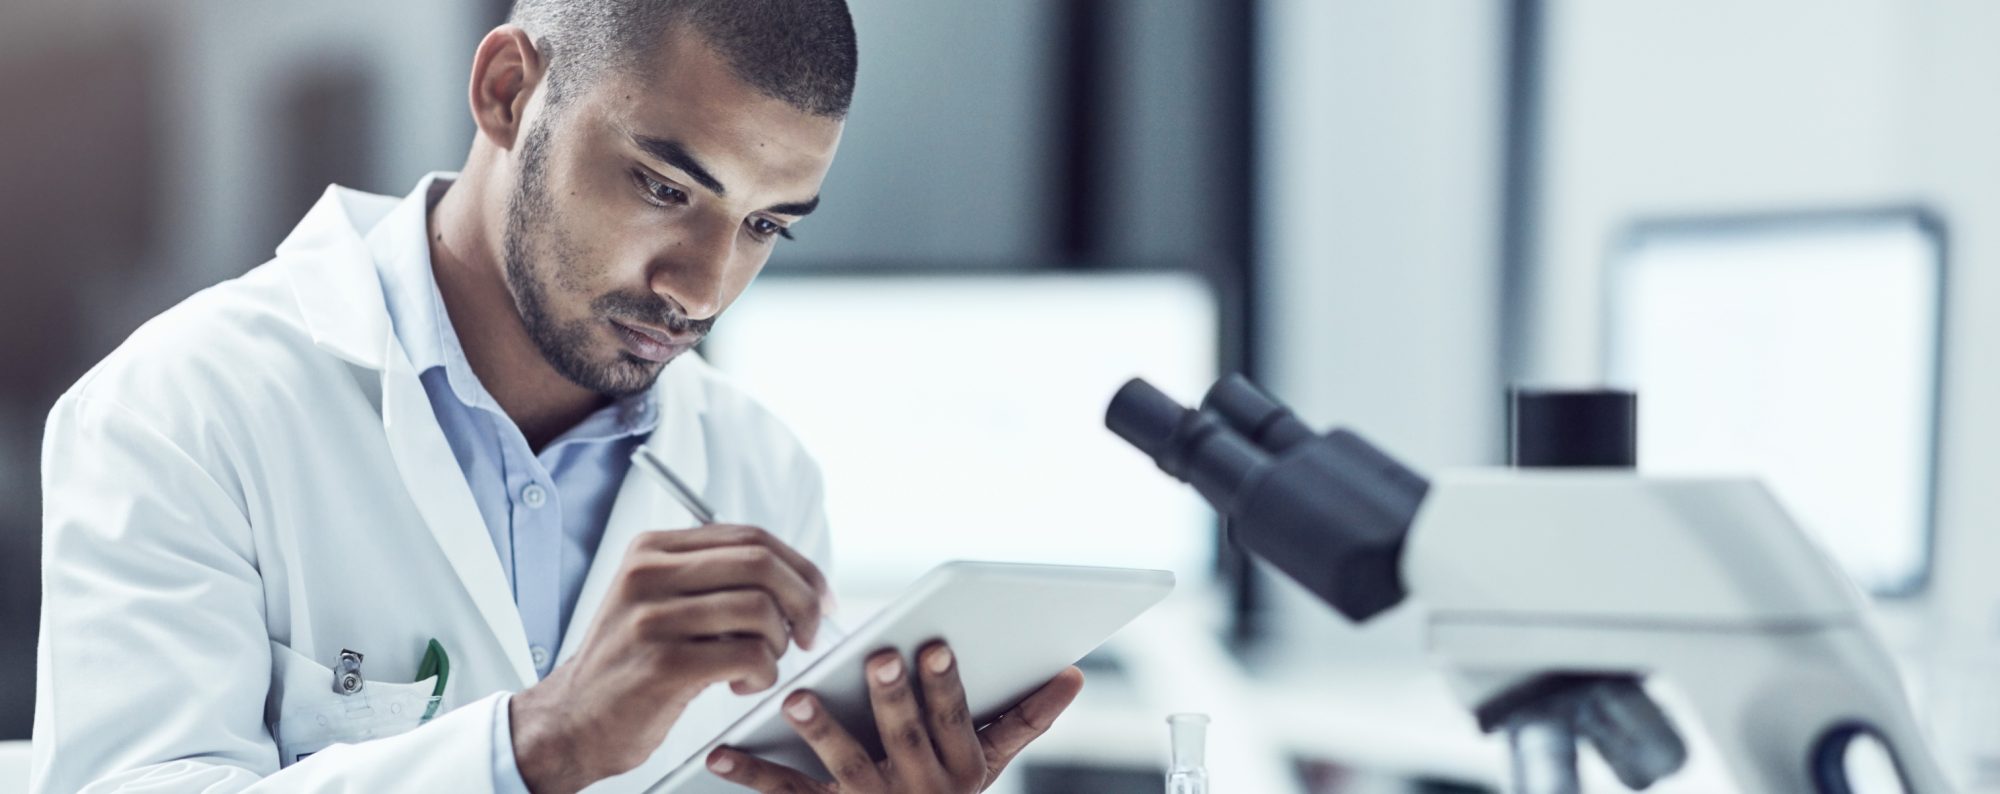 man in lab coat working on project with microscope